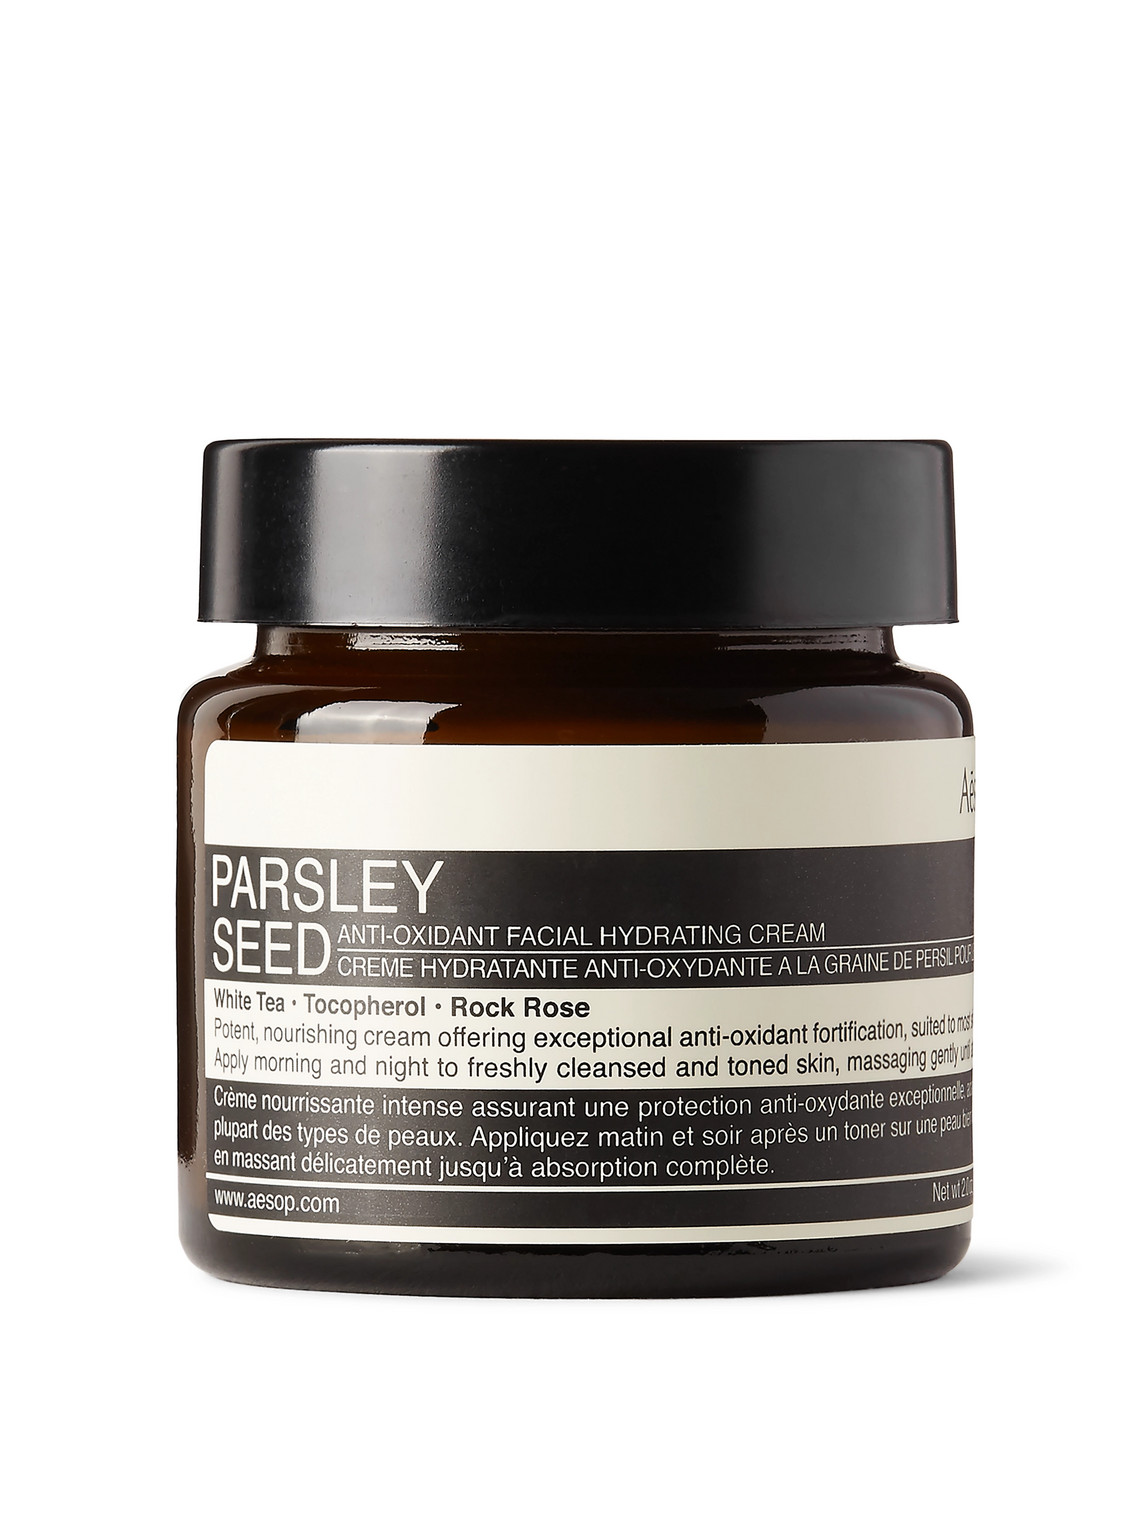 Aesop Parsley Seed Anti-oxidant Facial Hydrating Cream 60ml In Colorless